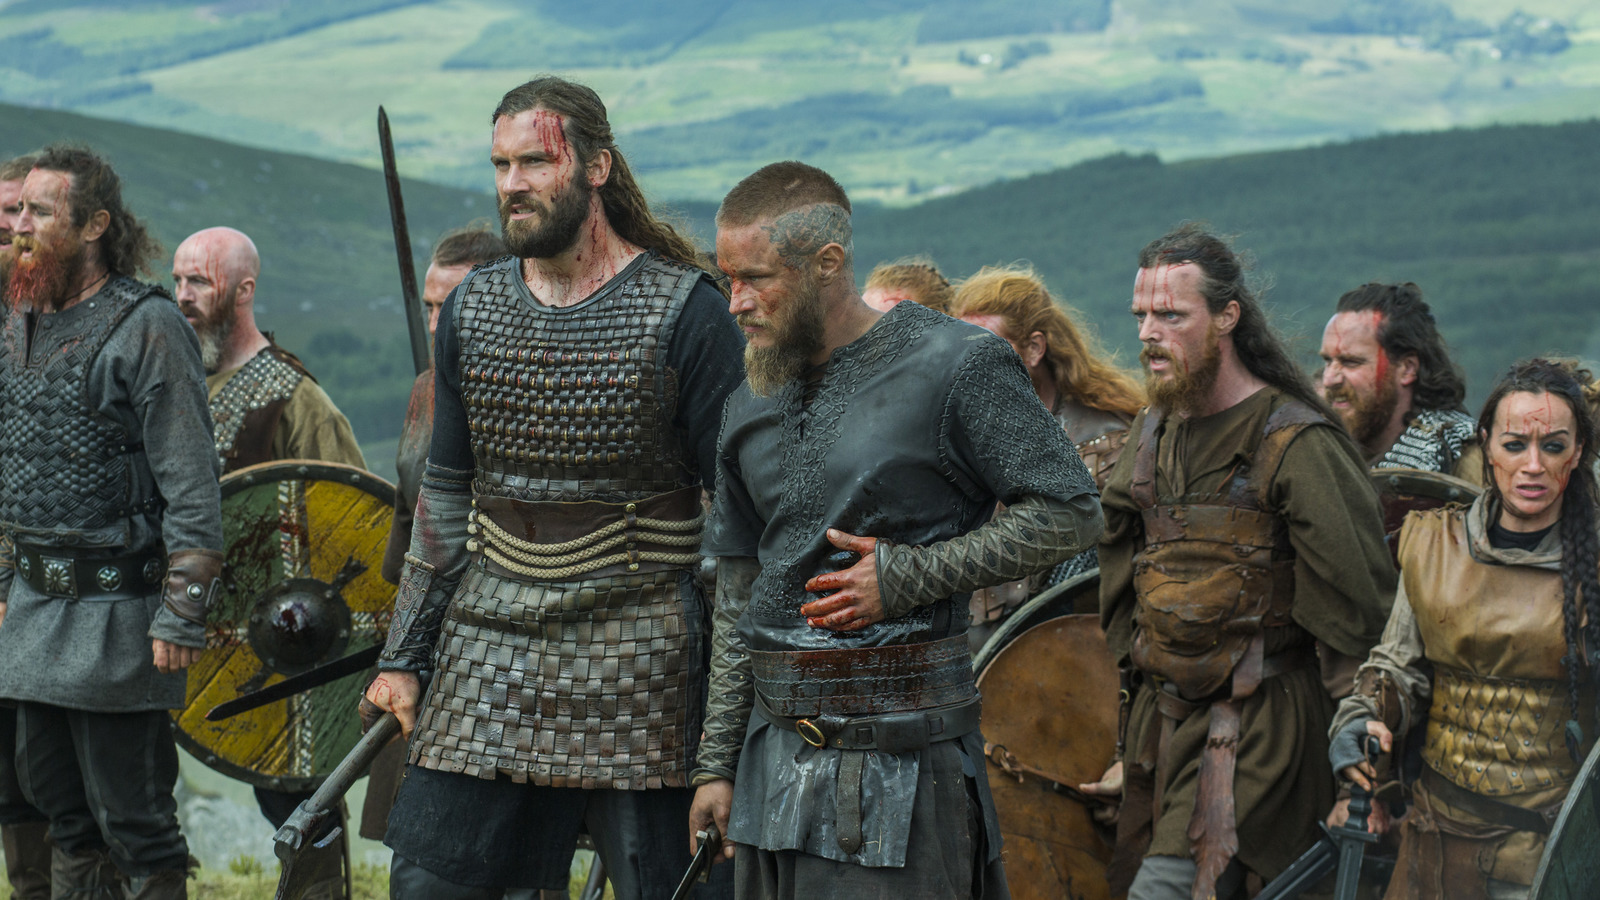 What The Cast Of Vikings: Valhalla Looks Like In Real Life